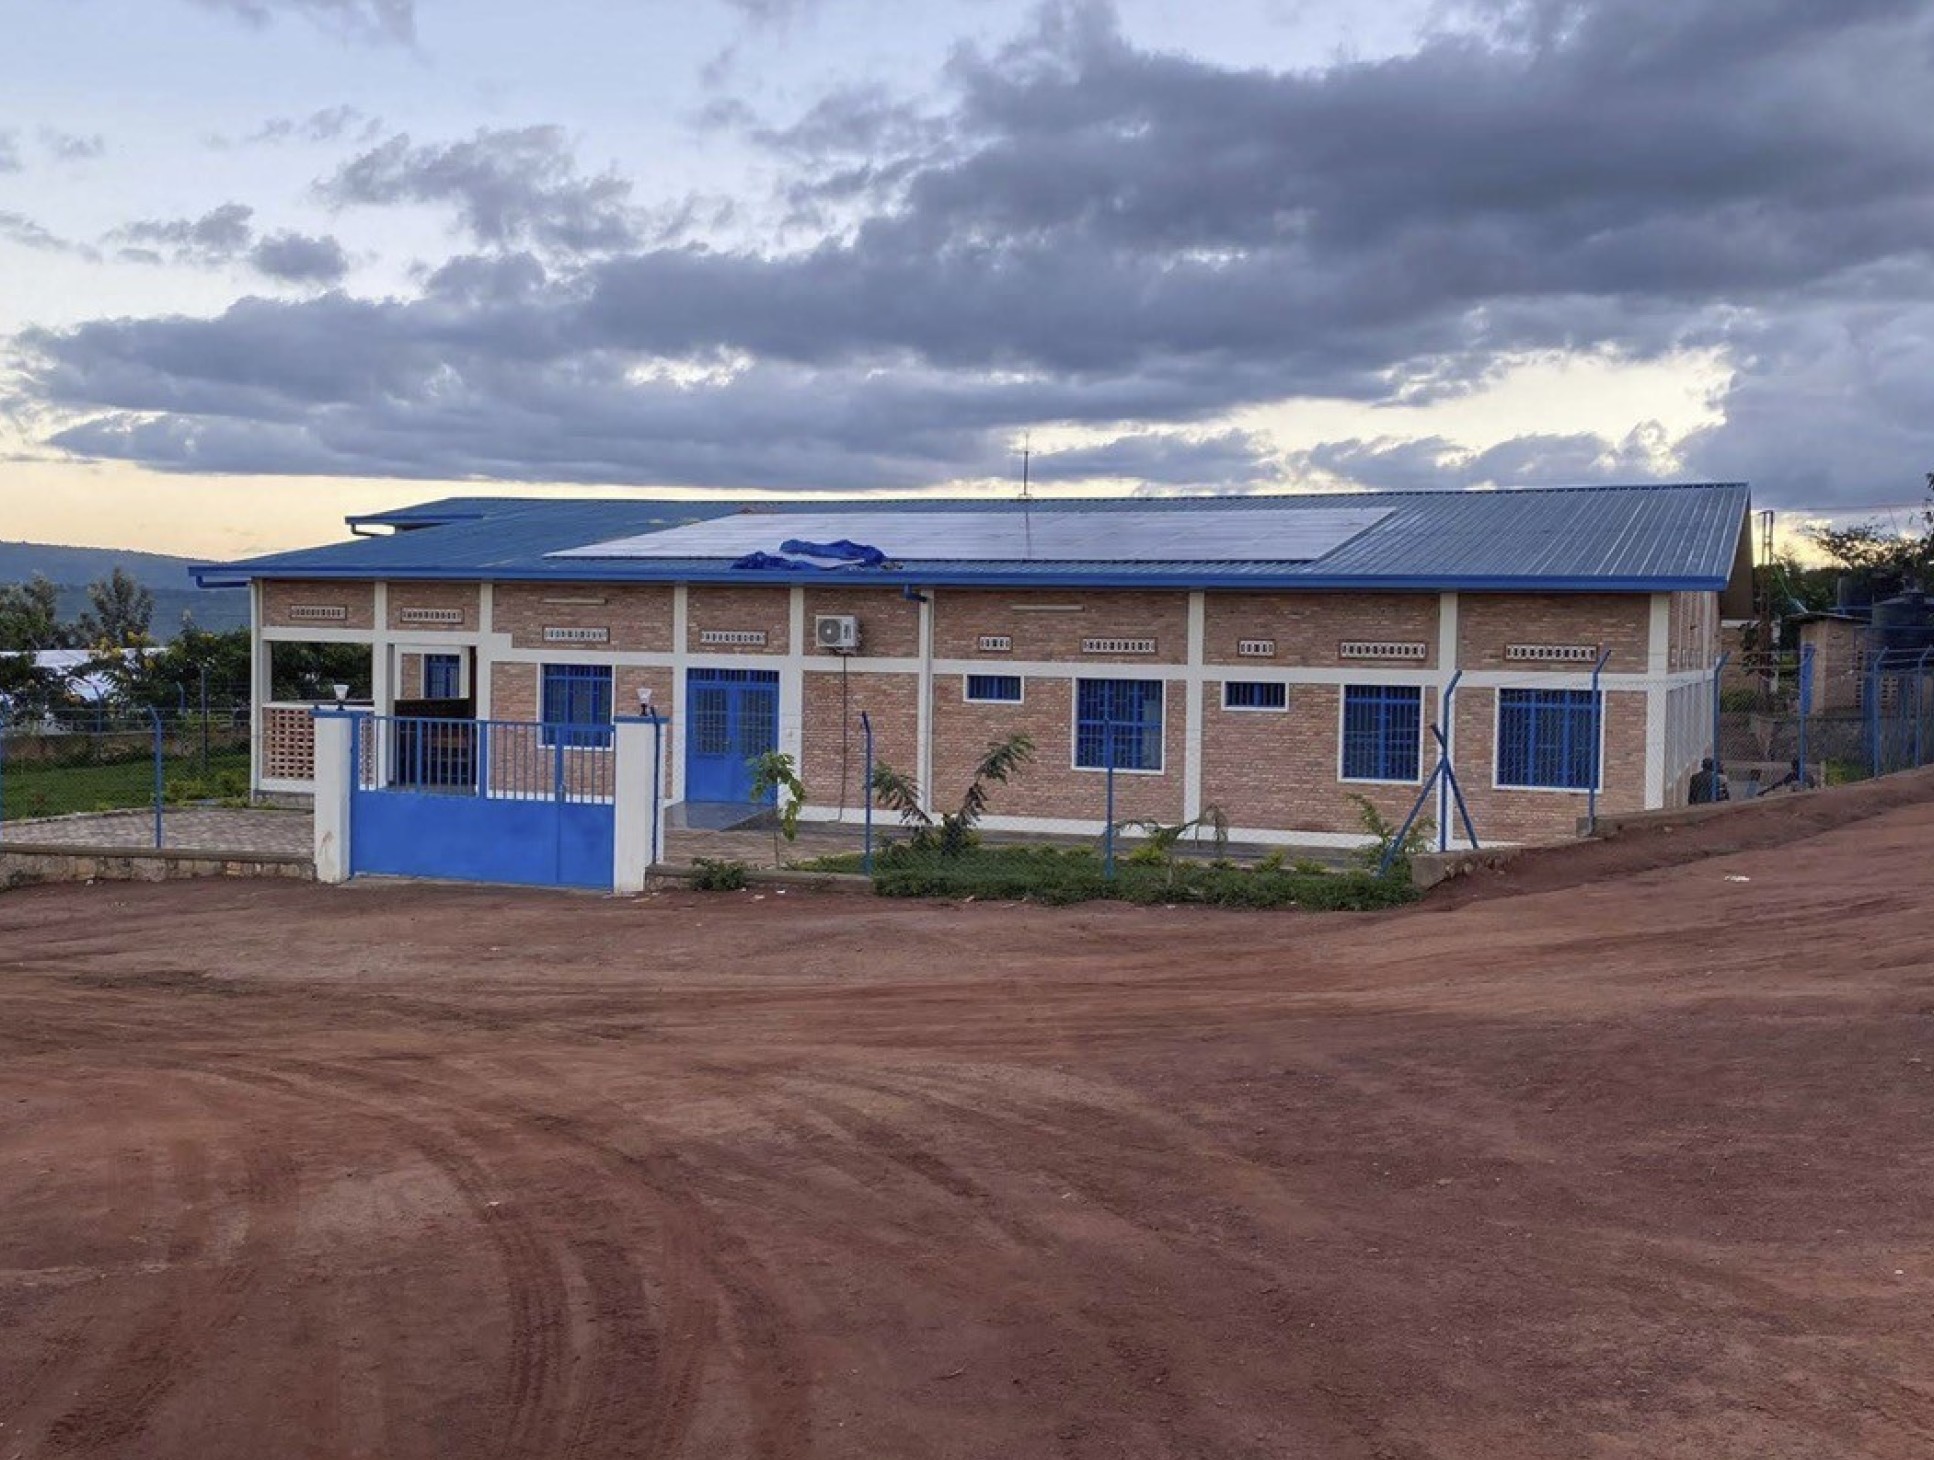 Health Centre at Mahama Refugee Camp in Rwanda with solar panels on the roof.